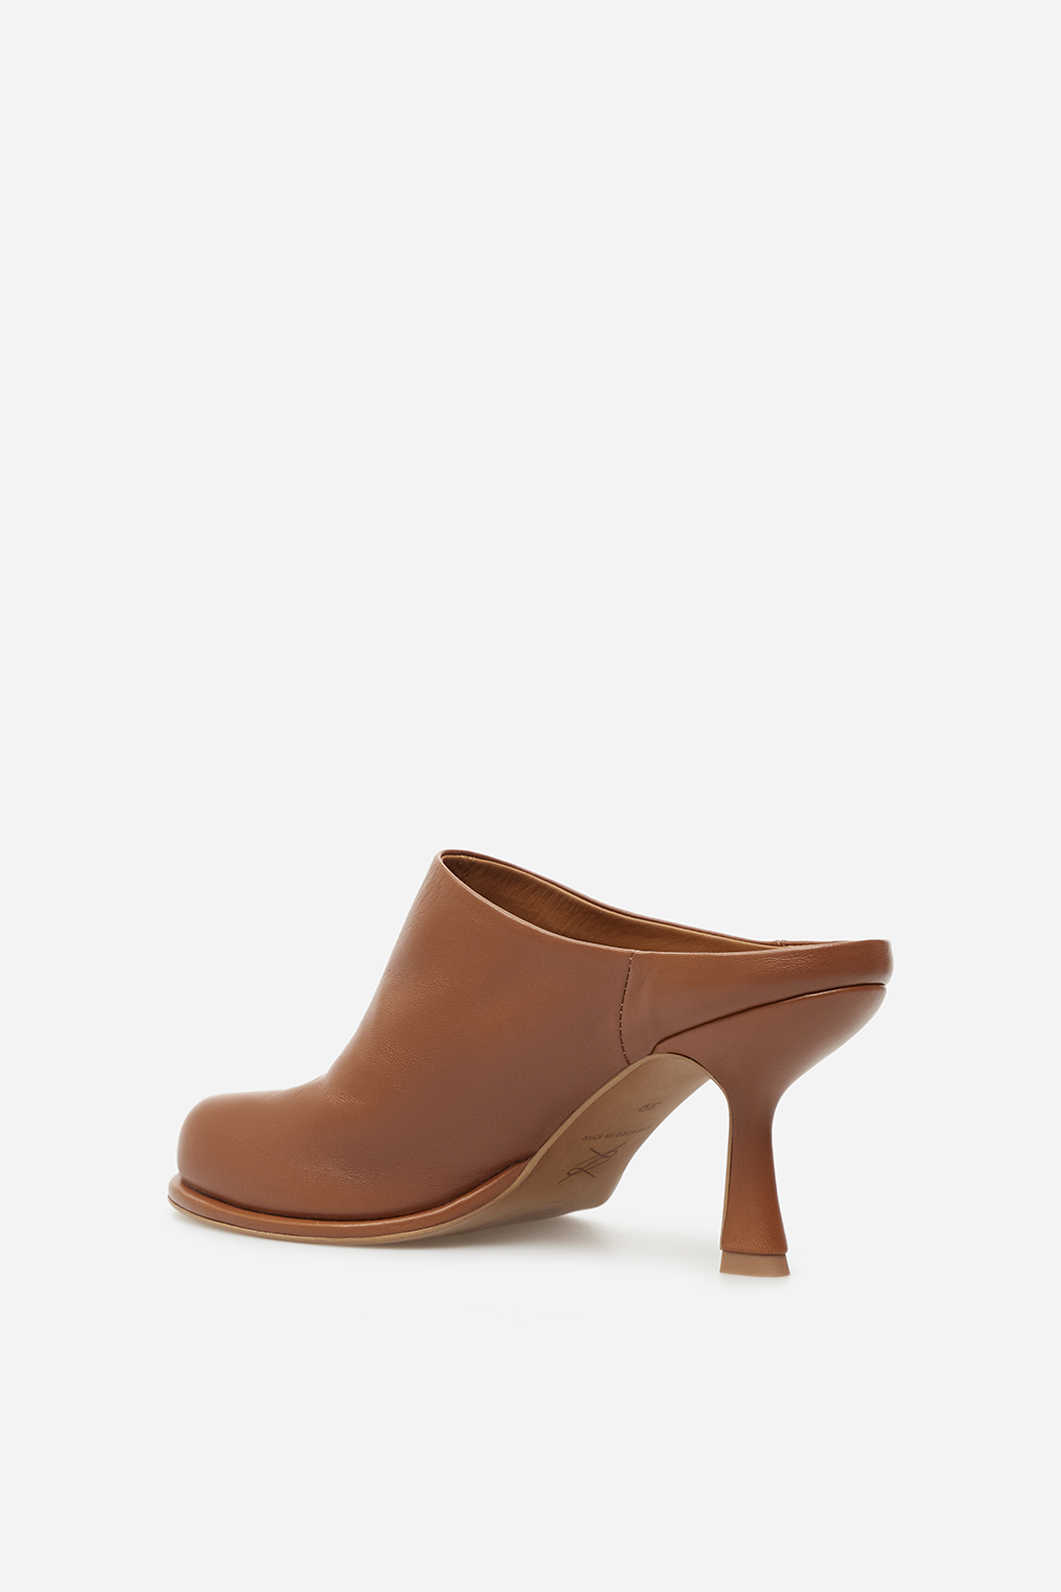 Annet caramel leather mules /7 cm/